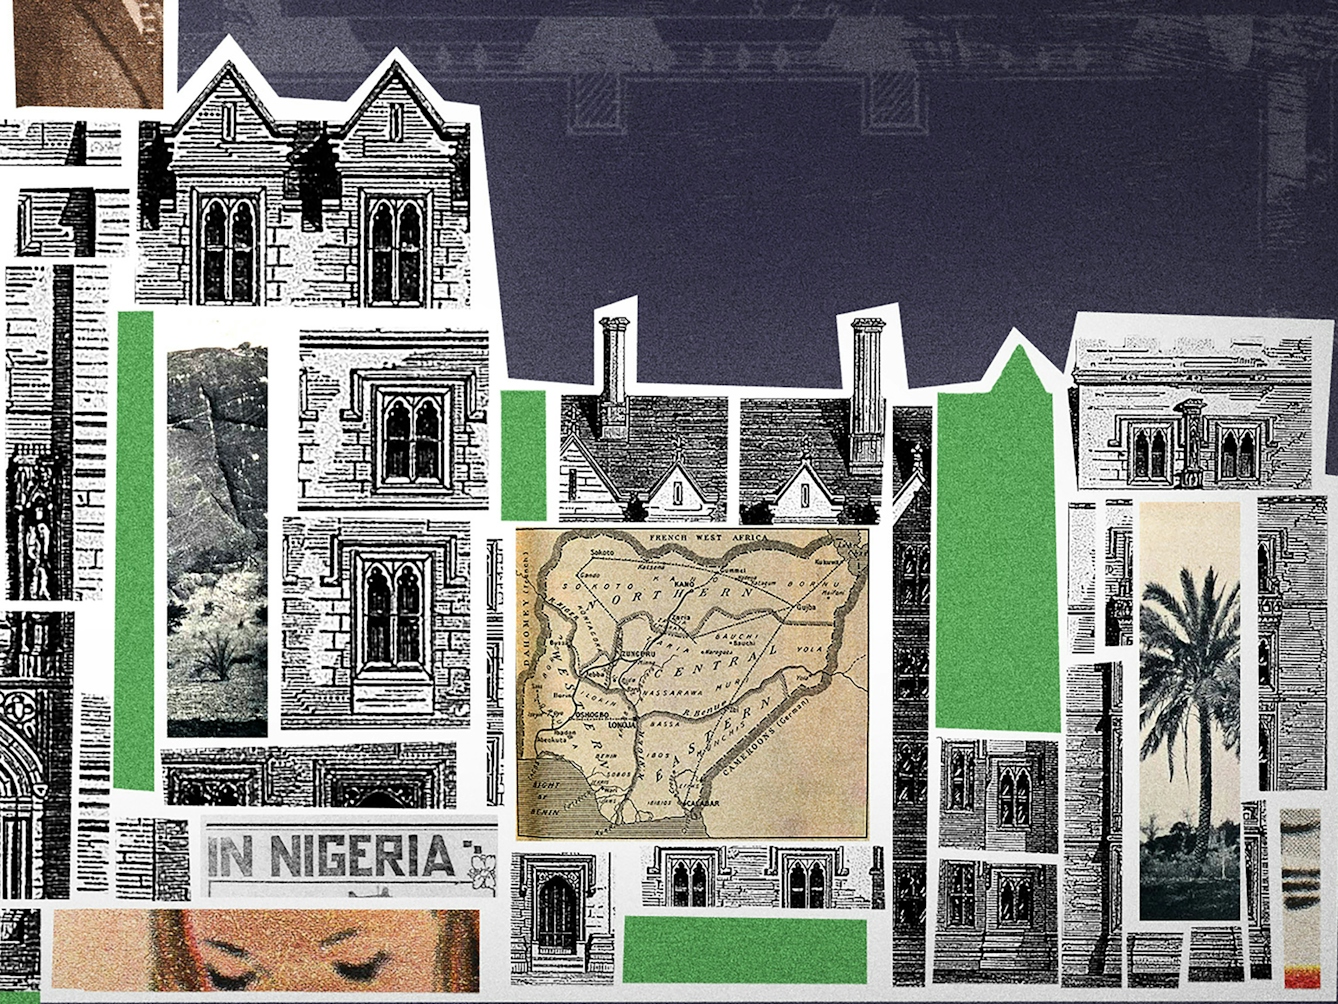 Crop from a larger digital collage. Shown is a building, labelled 'The London University'. The building's interior is filled with different collage elements, including newspaper cut-outs reading 'Africanus', 'Medical Service' and 'in Freetown'. Also shown in the building is an image of Kano (a city of Nigeria), images of the Bauchi Highlands, and a map of Nigeria. 